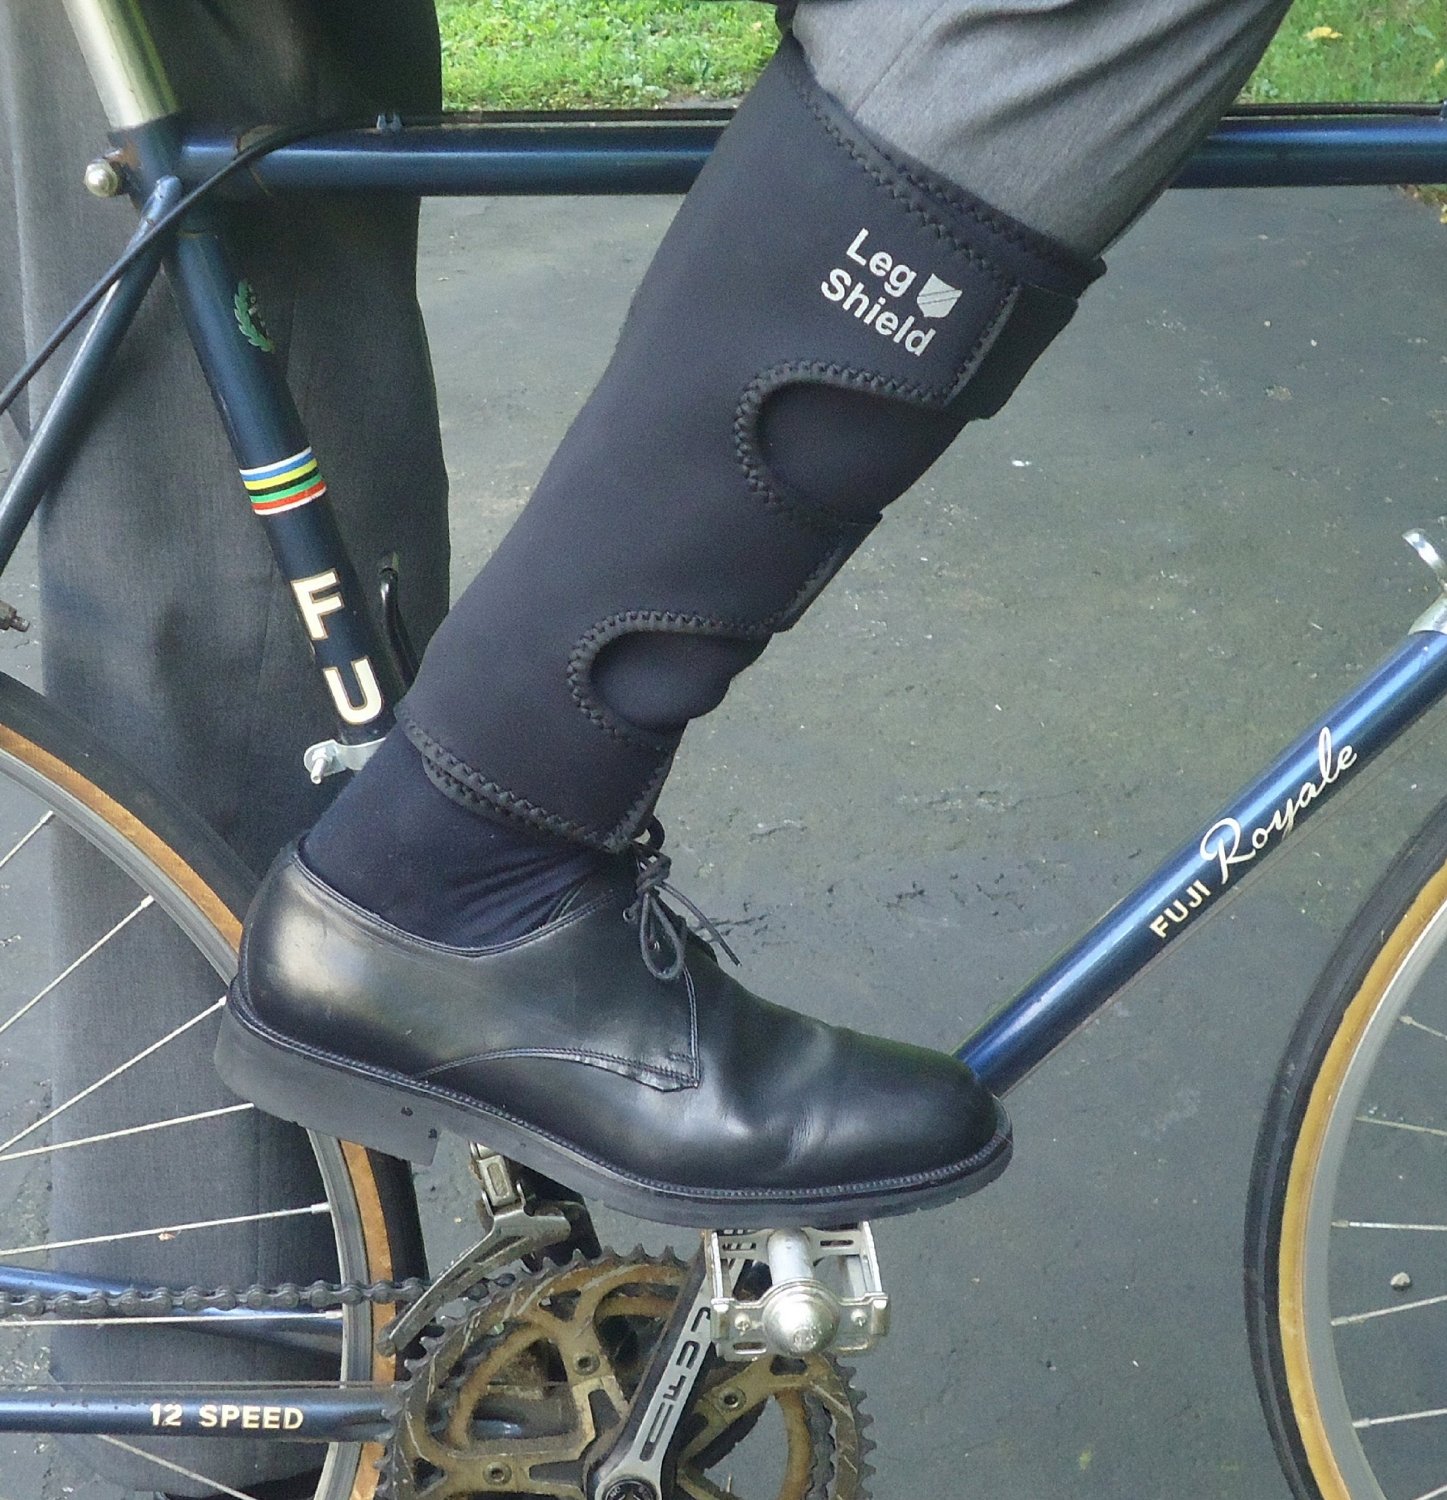 Straps and gaiters to keep your pants and ankles clean bicycling